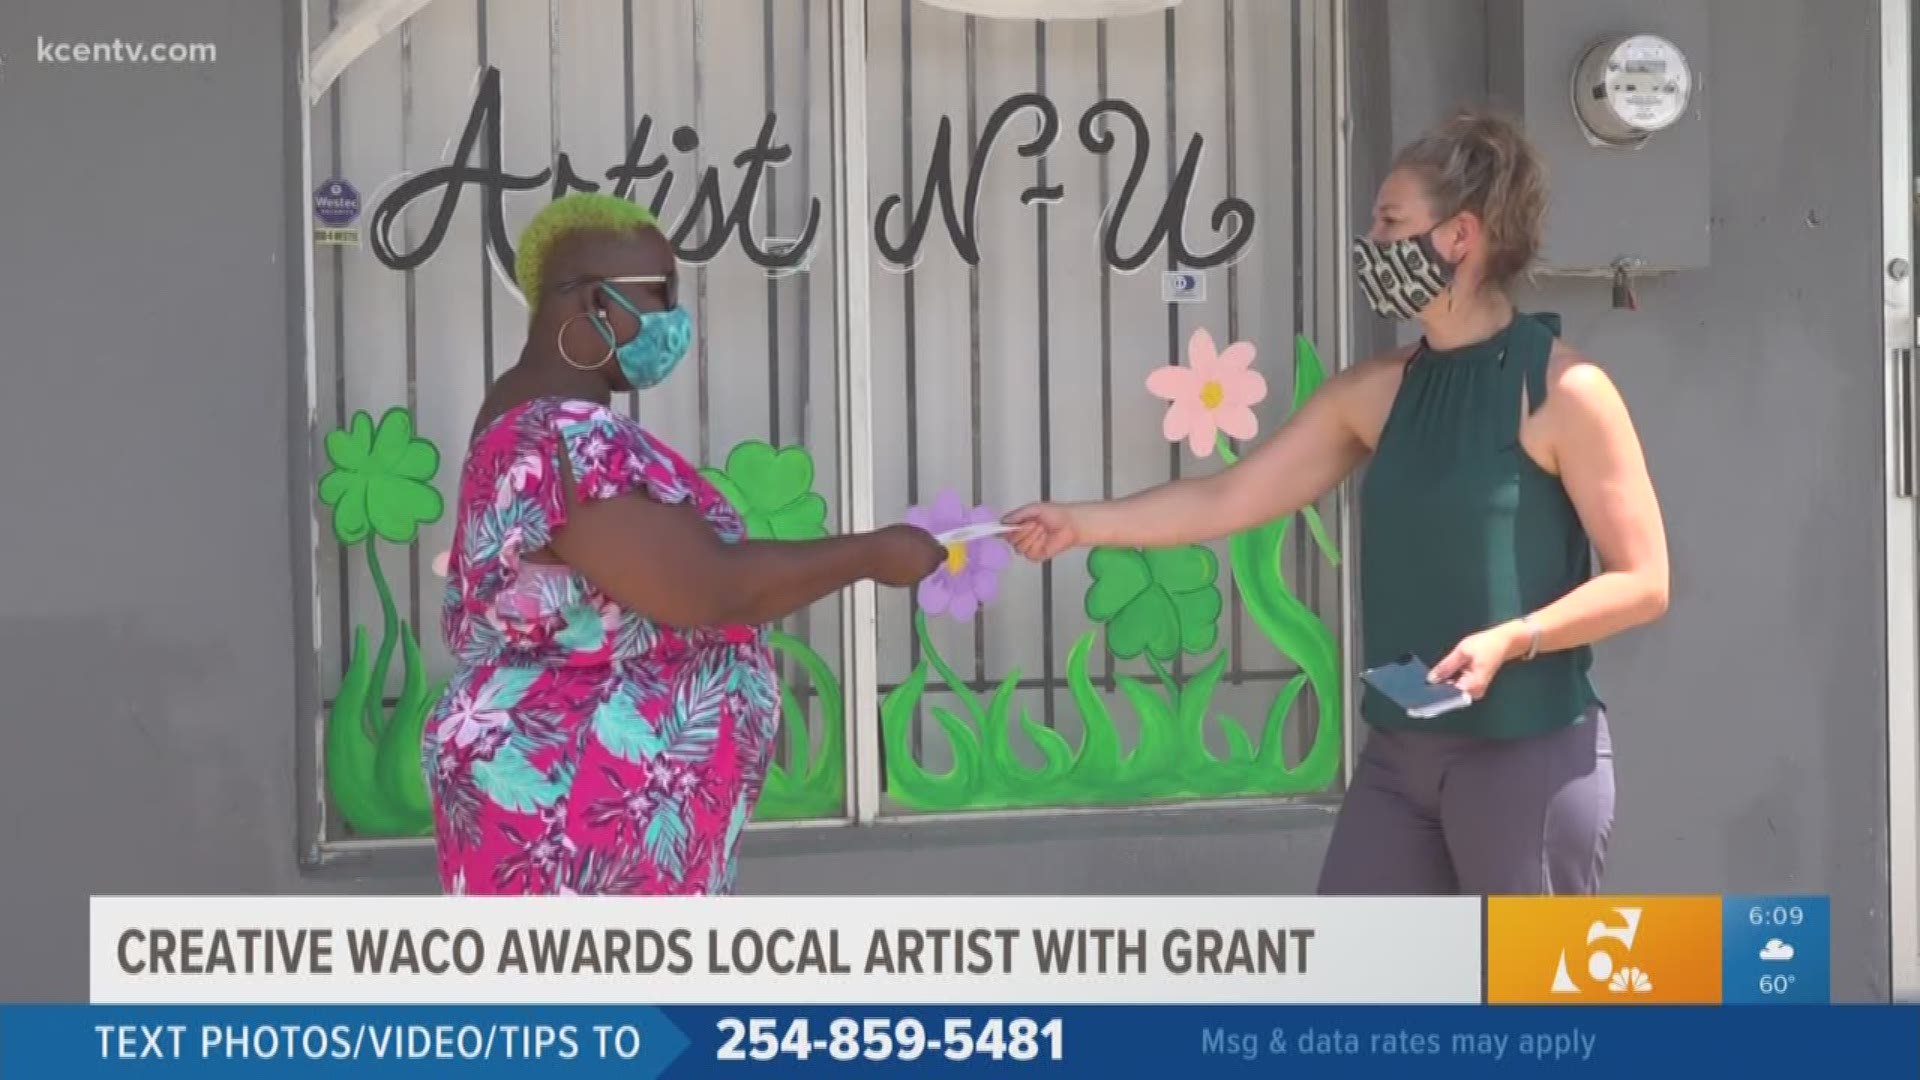 An organization that supports Central Texas artists started a fund to help those struggling due to the Coronavirus Pandemic.